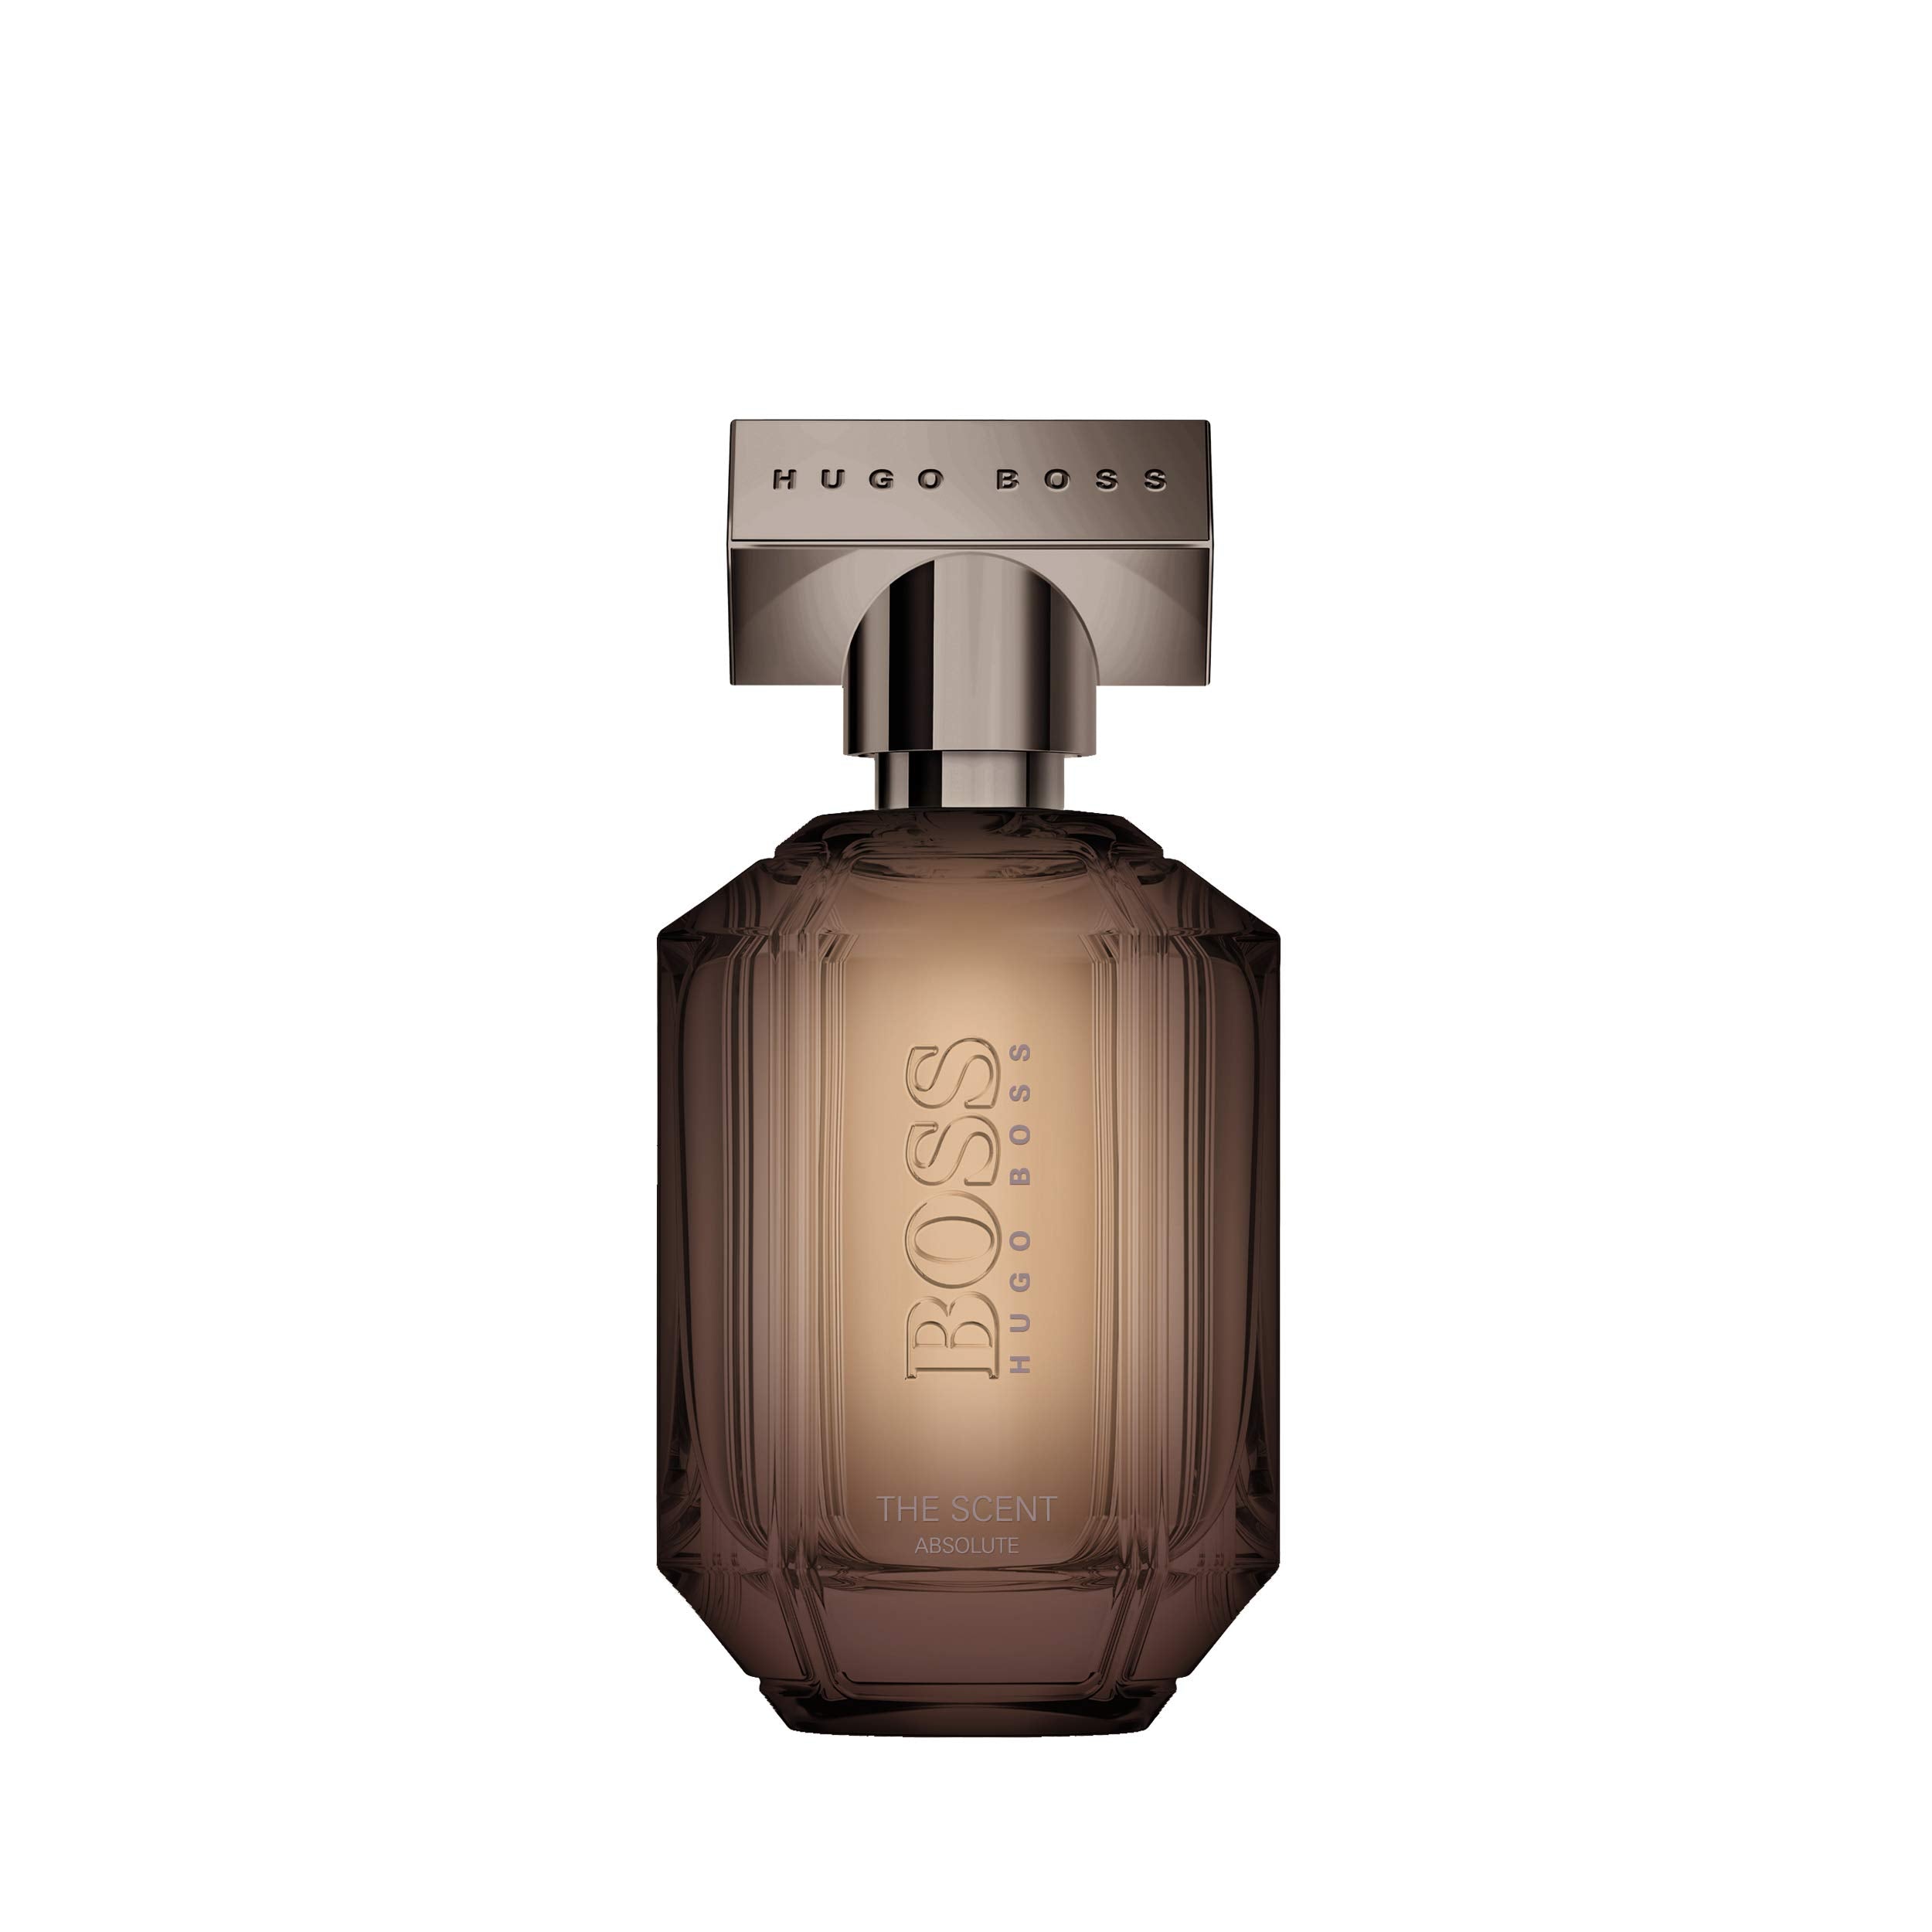 Perfume de Mujer Hugo Boss The Scent Absolute 100ML, EDT